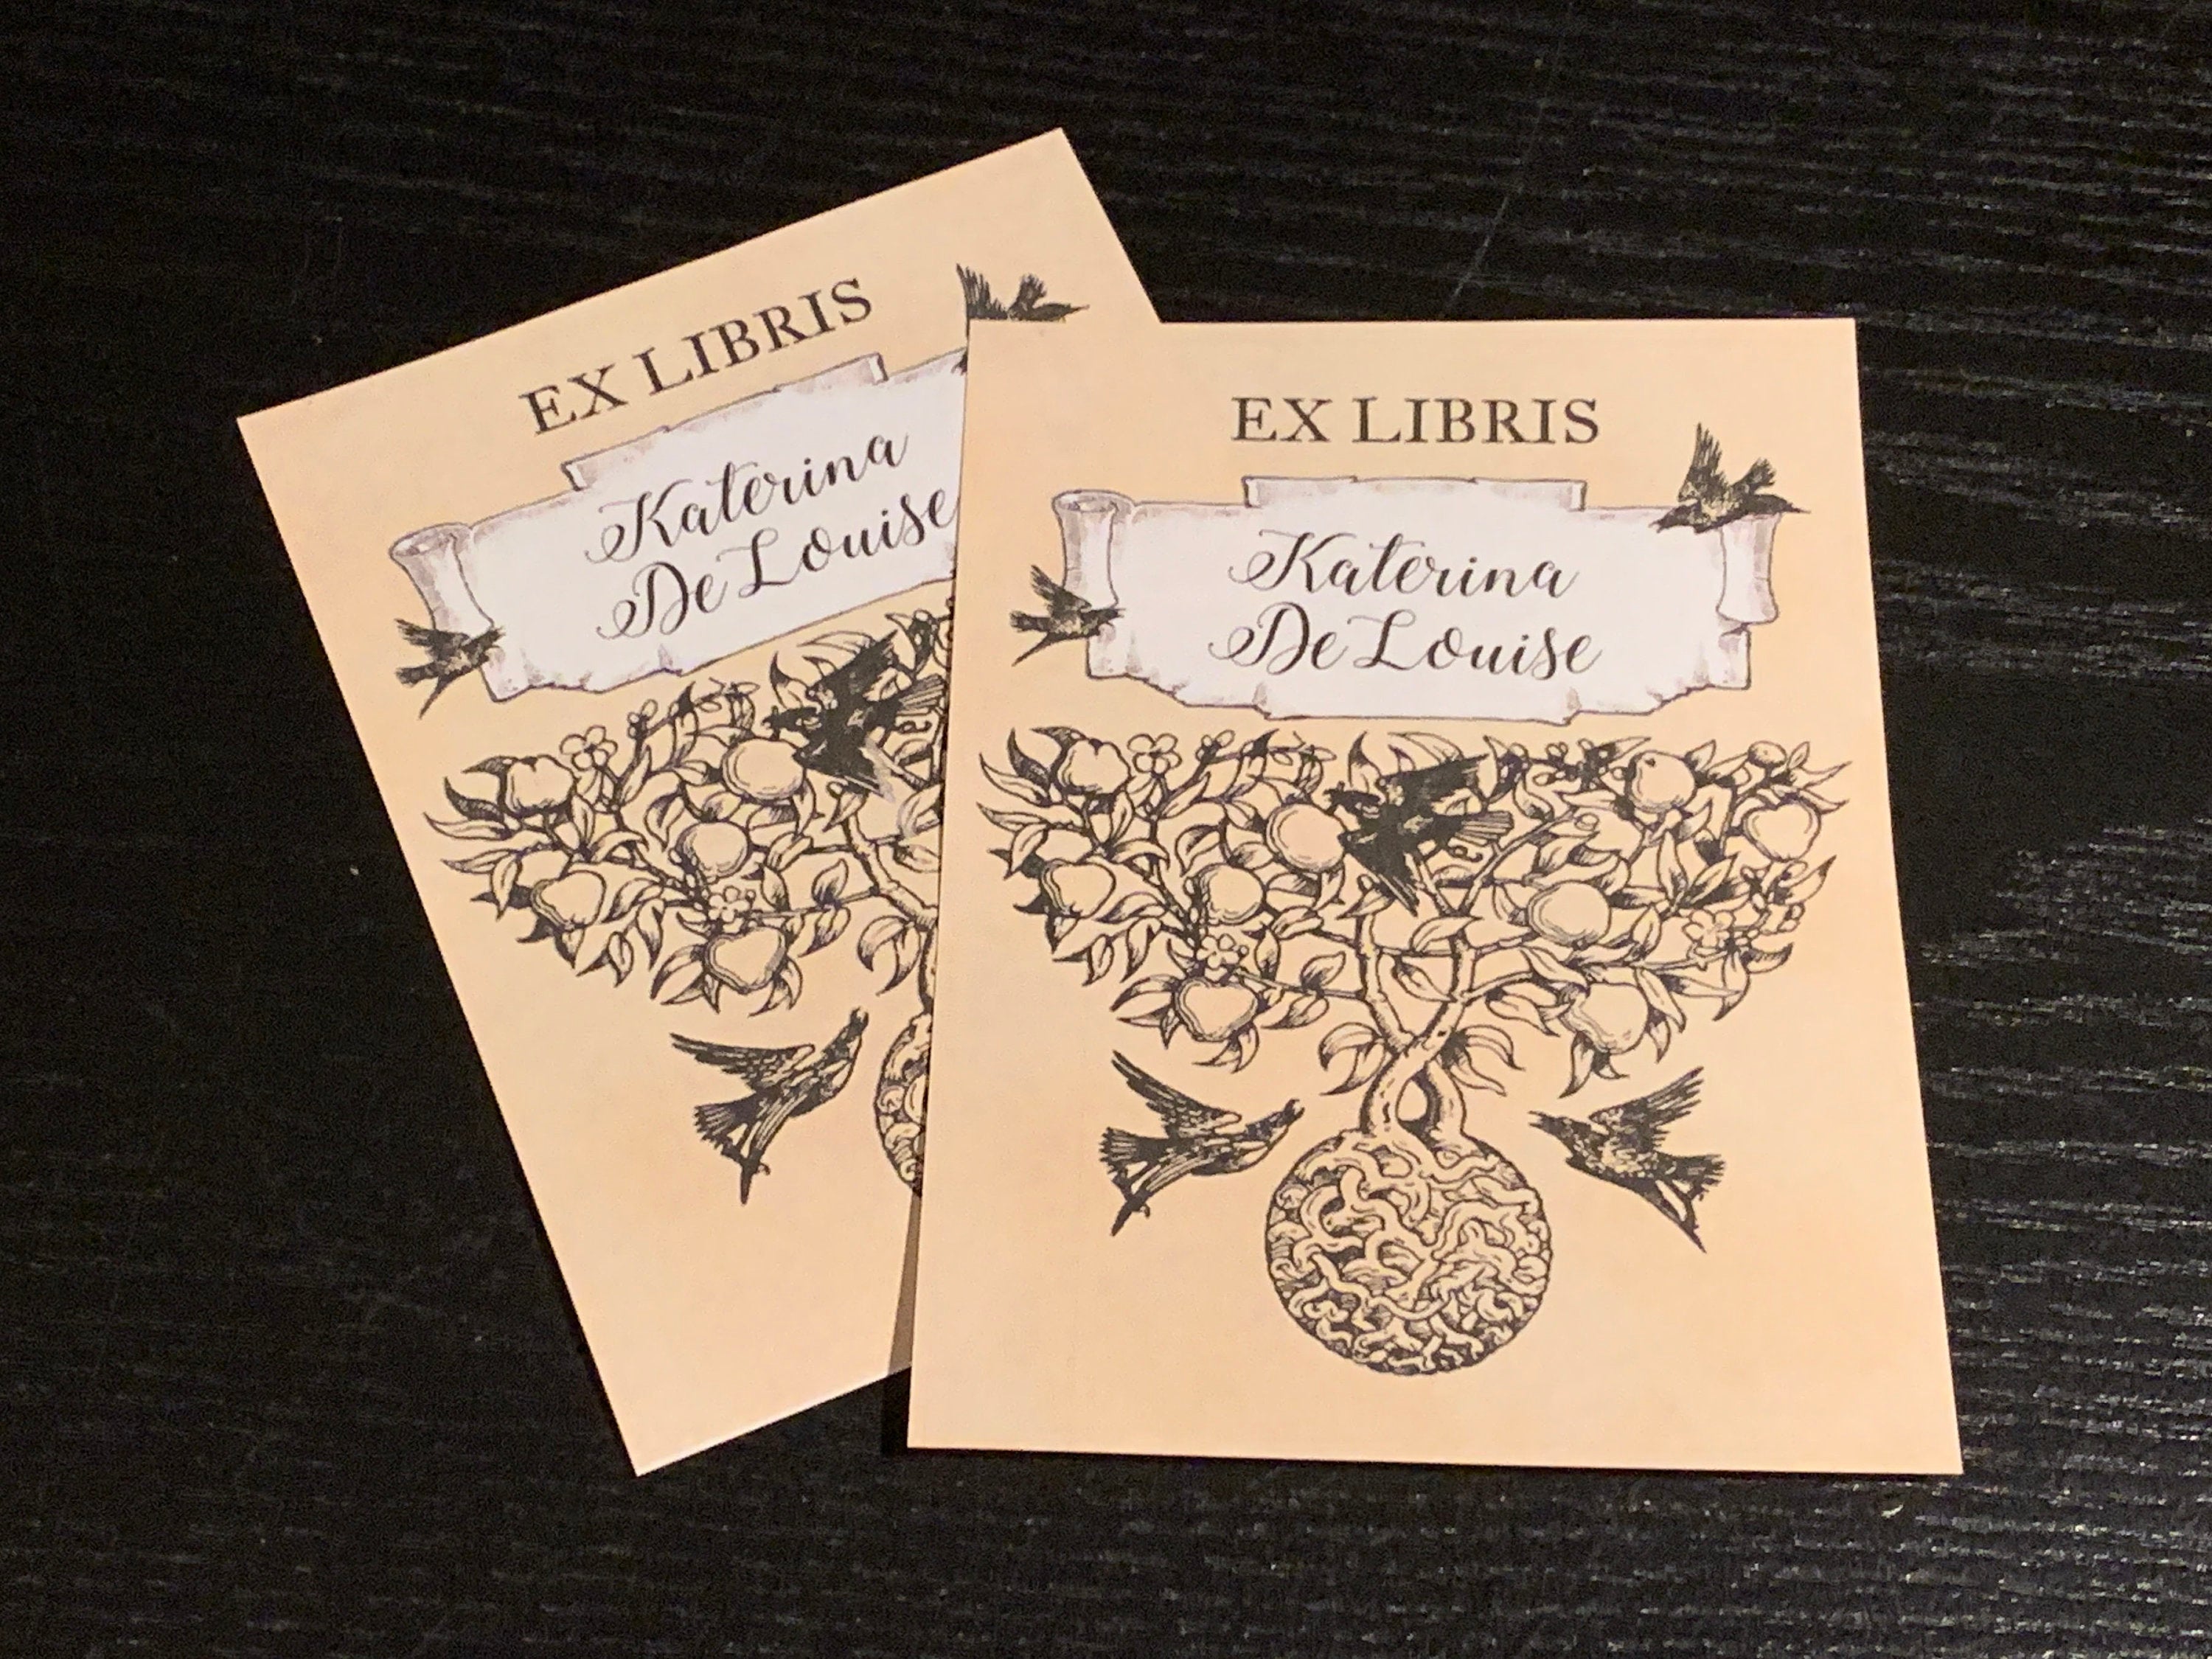 Grimm Crows, Personalized Ex-Libris Bookplates, Crafted on Traditional Gummed Paper, 3in x 4in, Set of 30